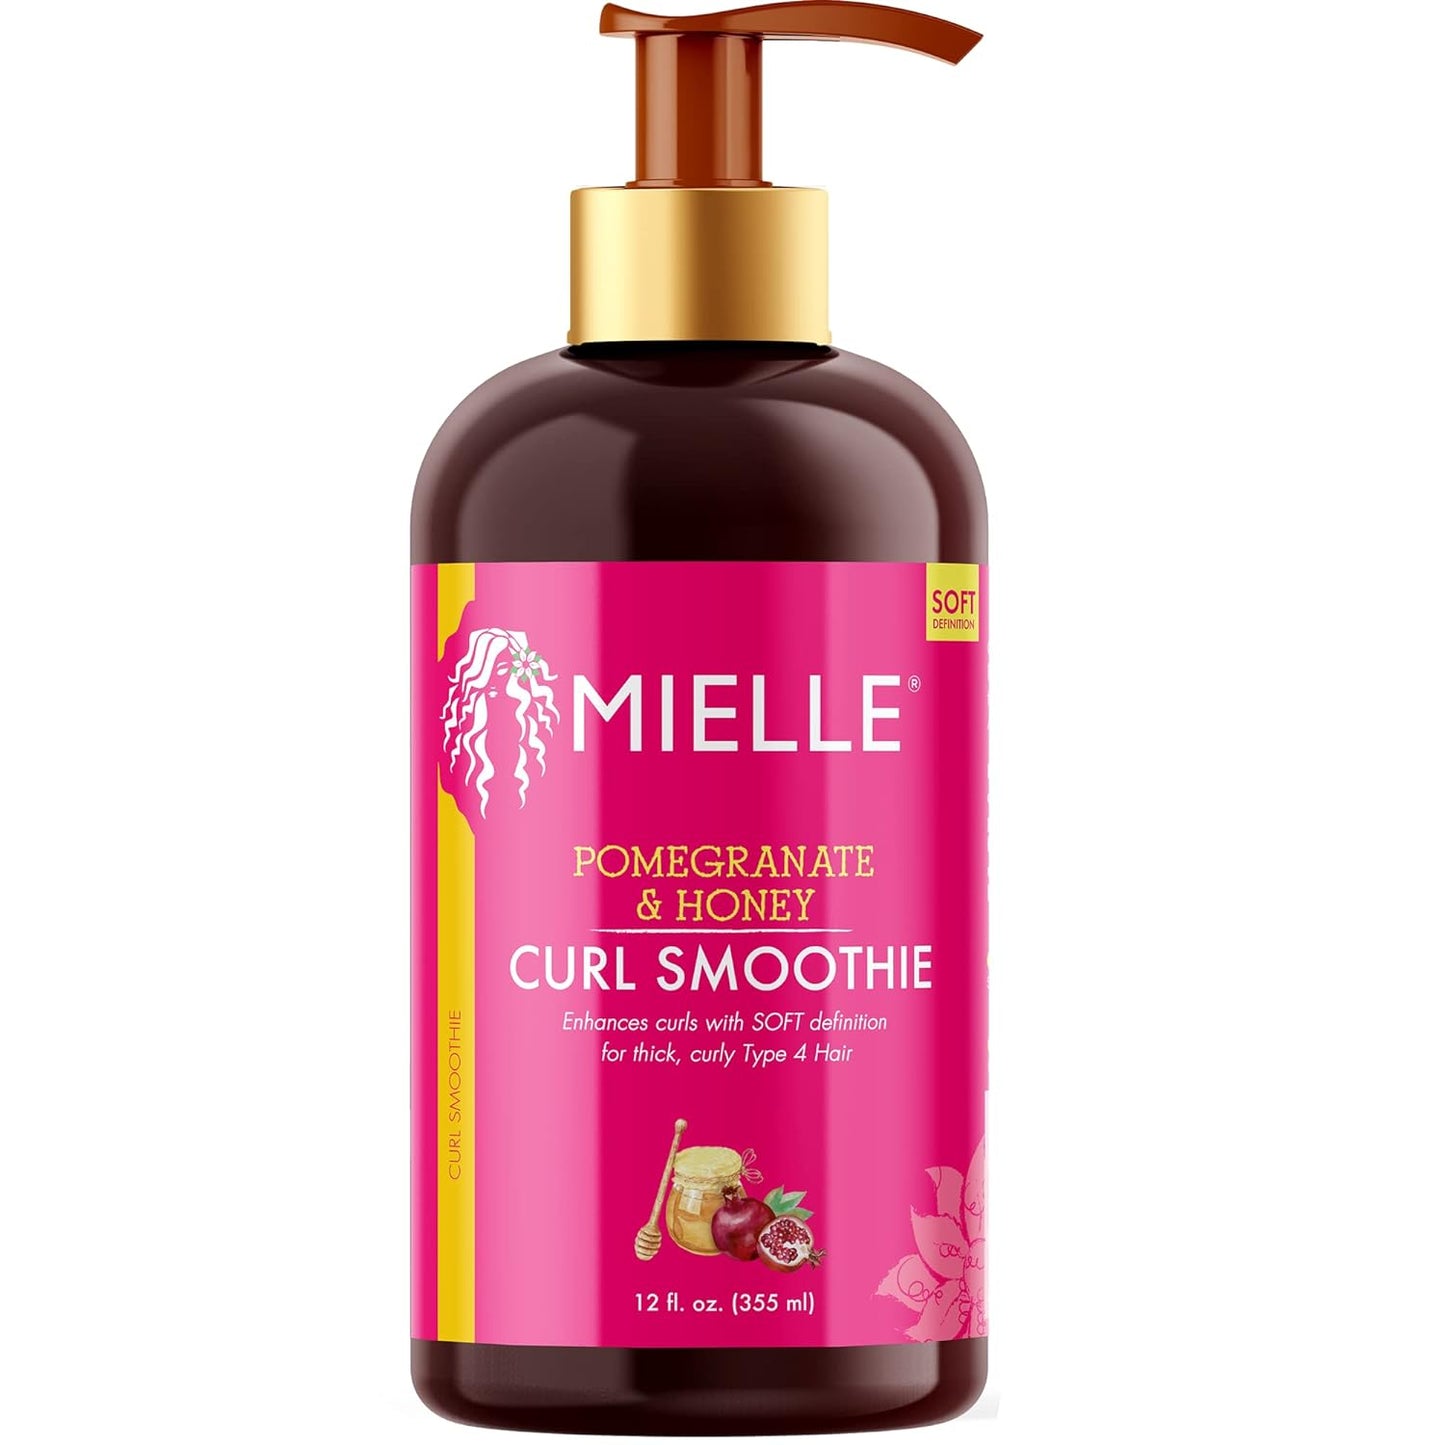 Mielle Curl Smoothie Pomegranate